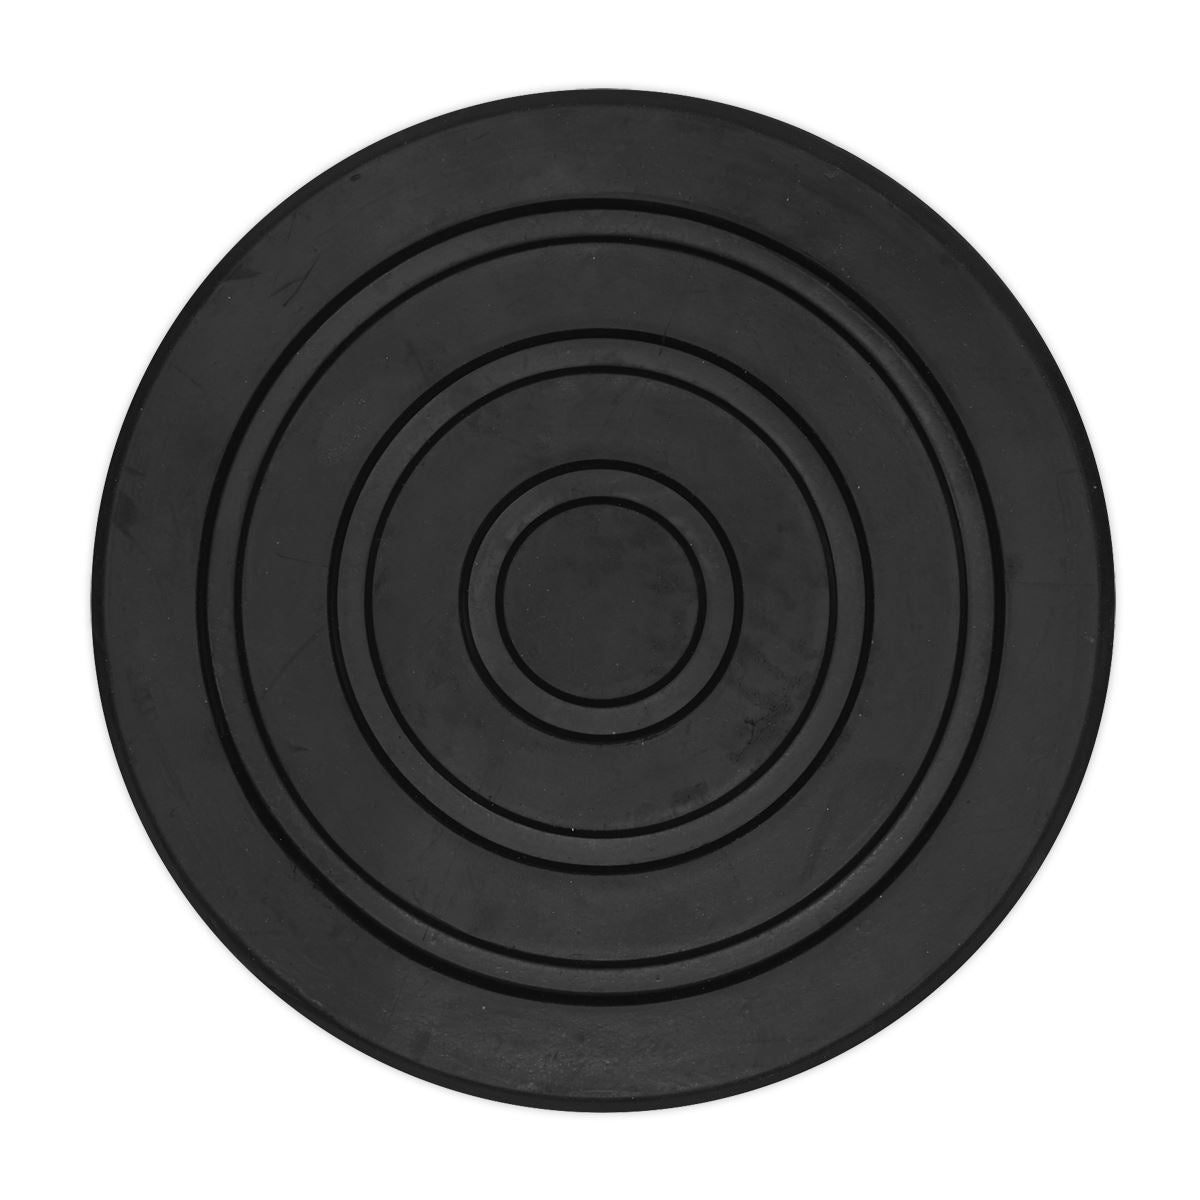 Sealey Safety Rubber Trolley Jack Pad Type A To Fit 128-131mm Saddle